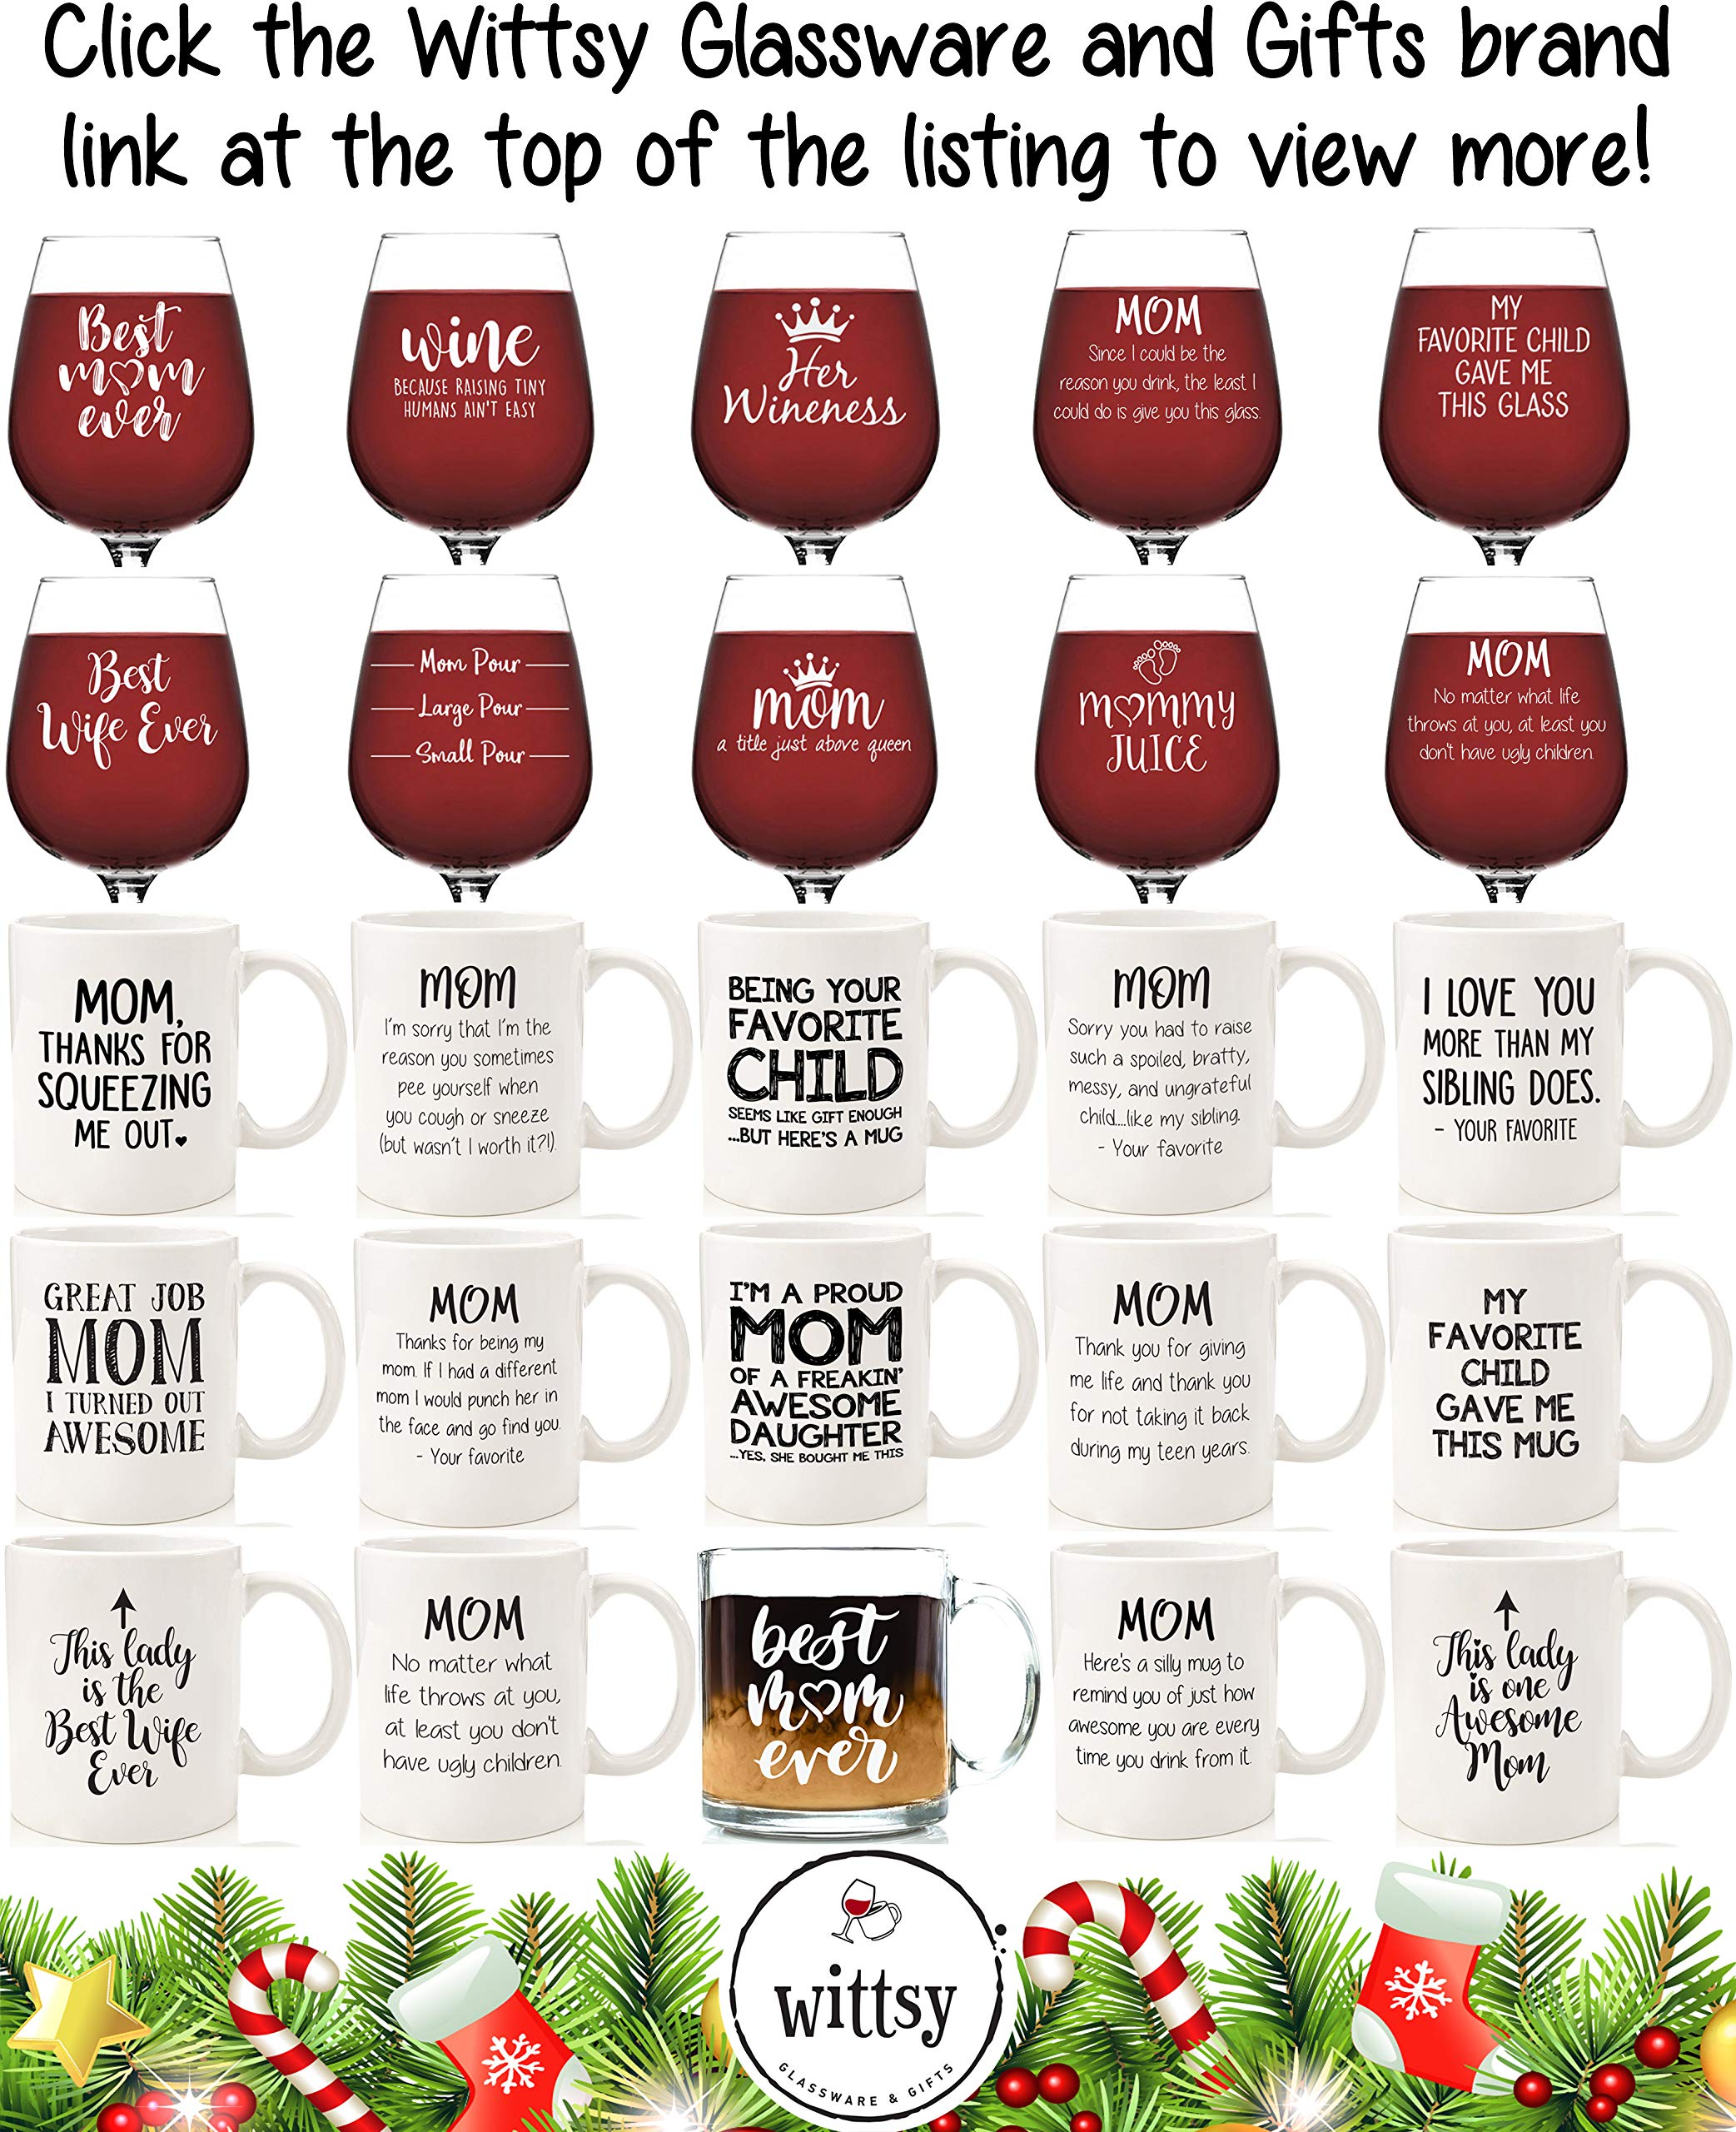 Mom Giving Me Life Funny Wine Glass - Cool Christmas Gifts for Mom from Son, Daughter, Child - Unique Xmas Best Mom Gifts - Fun Gag Birthday Present Idea for Mother, Women - Novelty Mom Wine Glasses